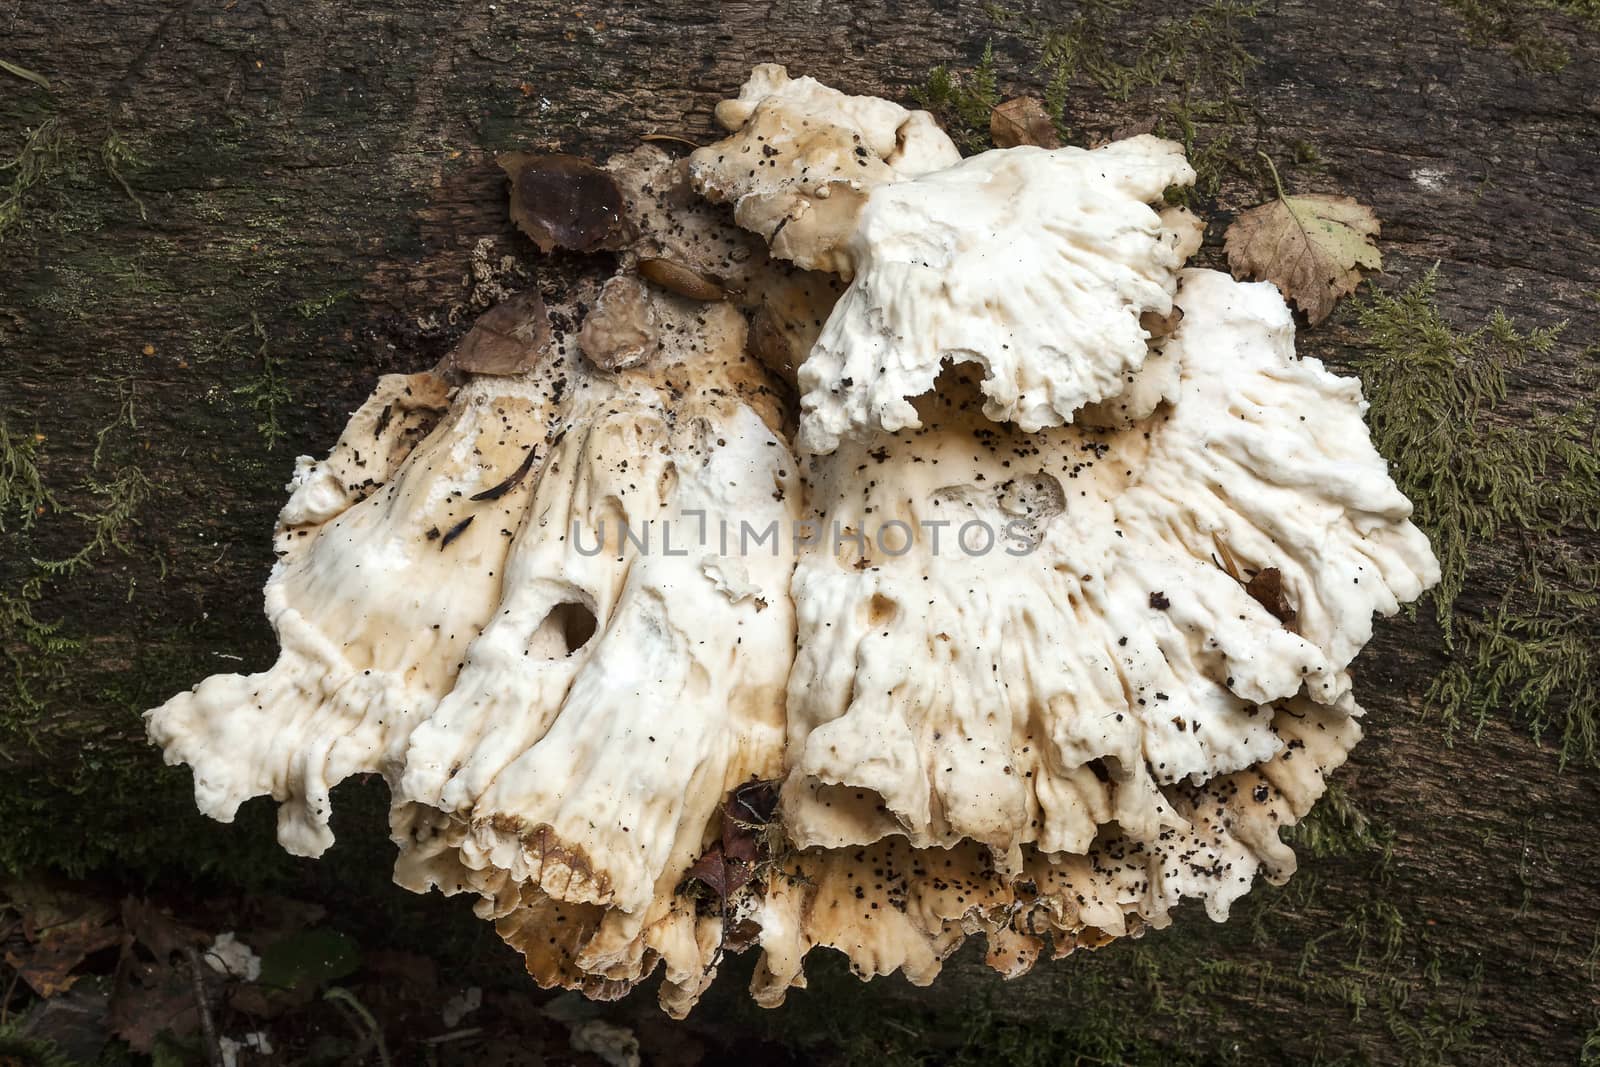 Bracket fungus growing on a decaying tree trunk in the autumn fall